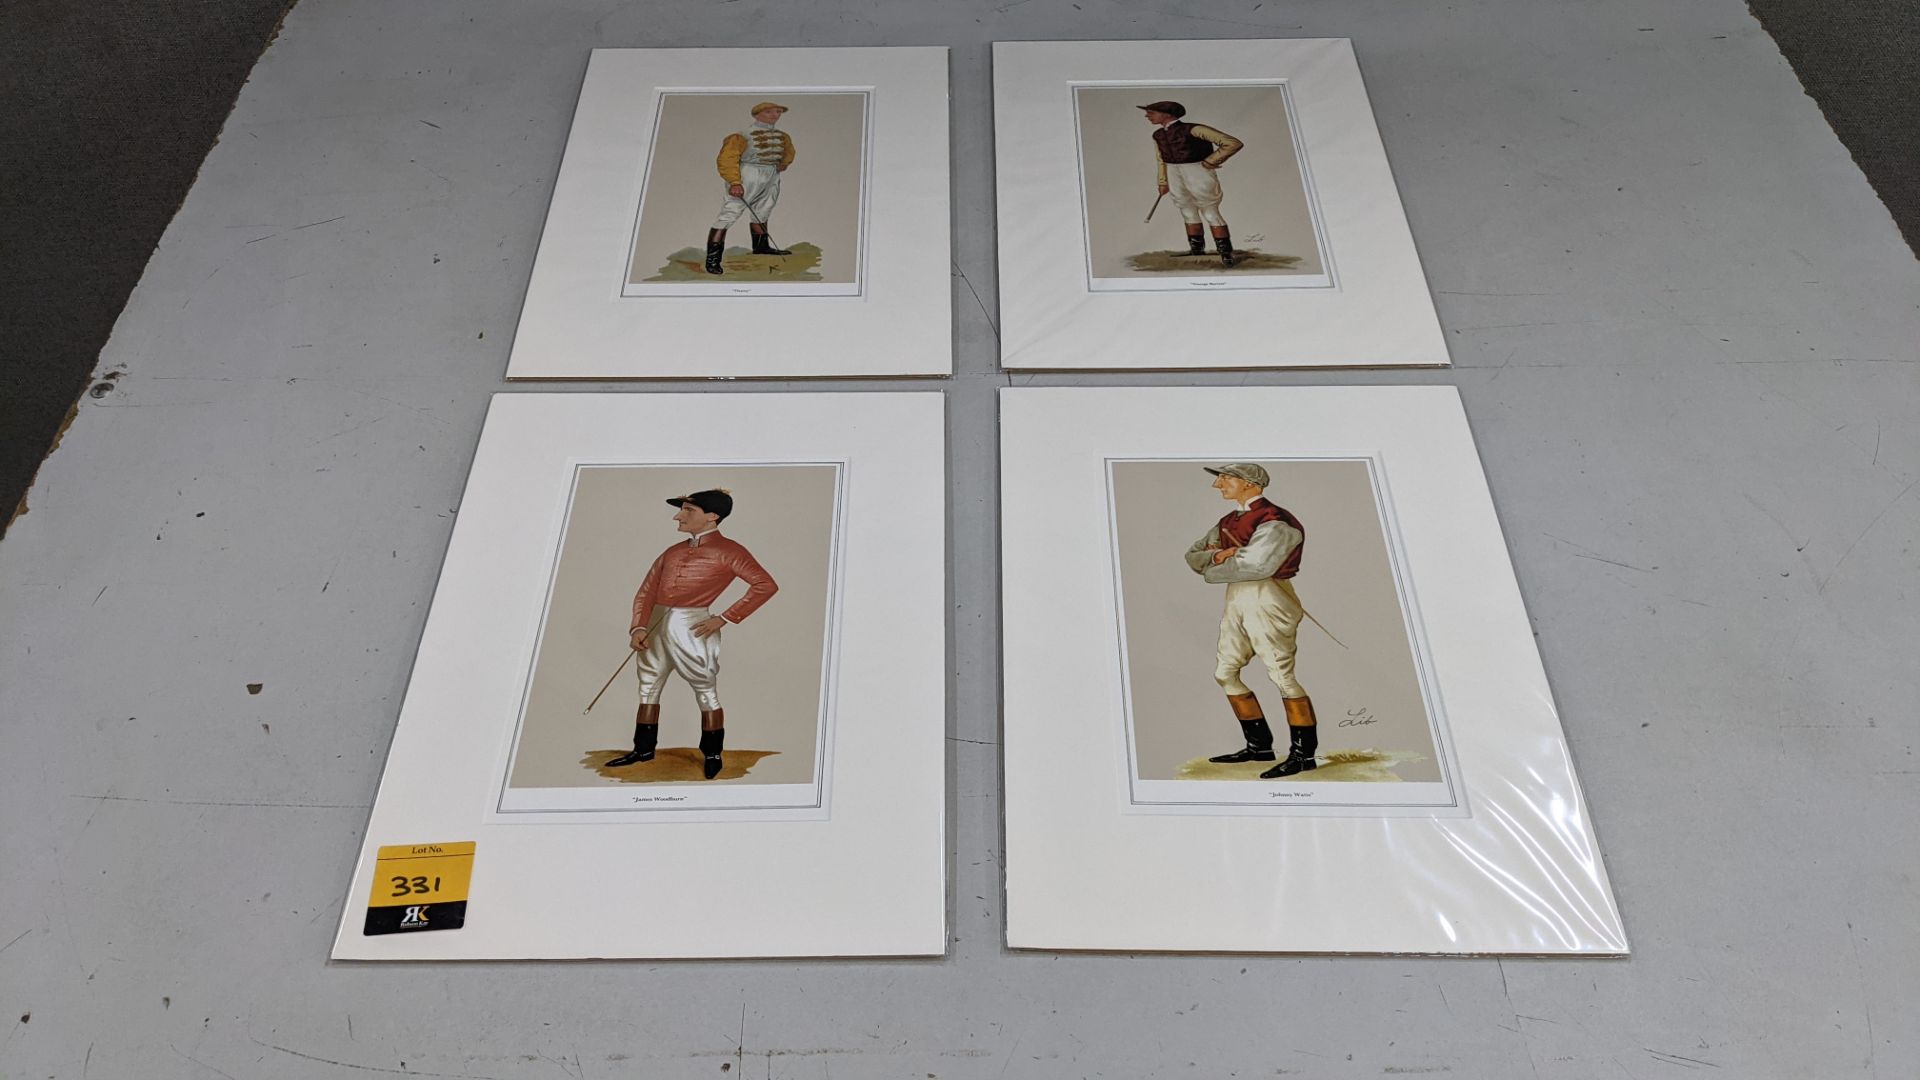 4 off horse jockey prints, each measuring approx. 300mm x 400mm including cardboard mount. This lot